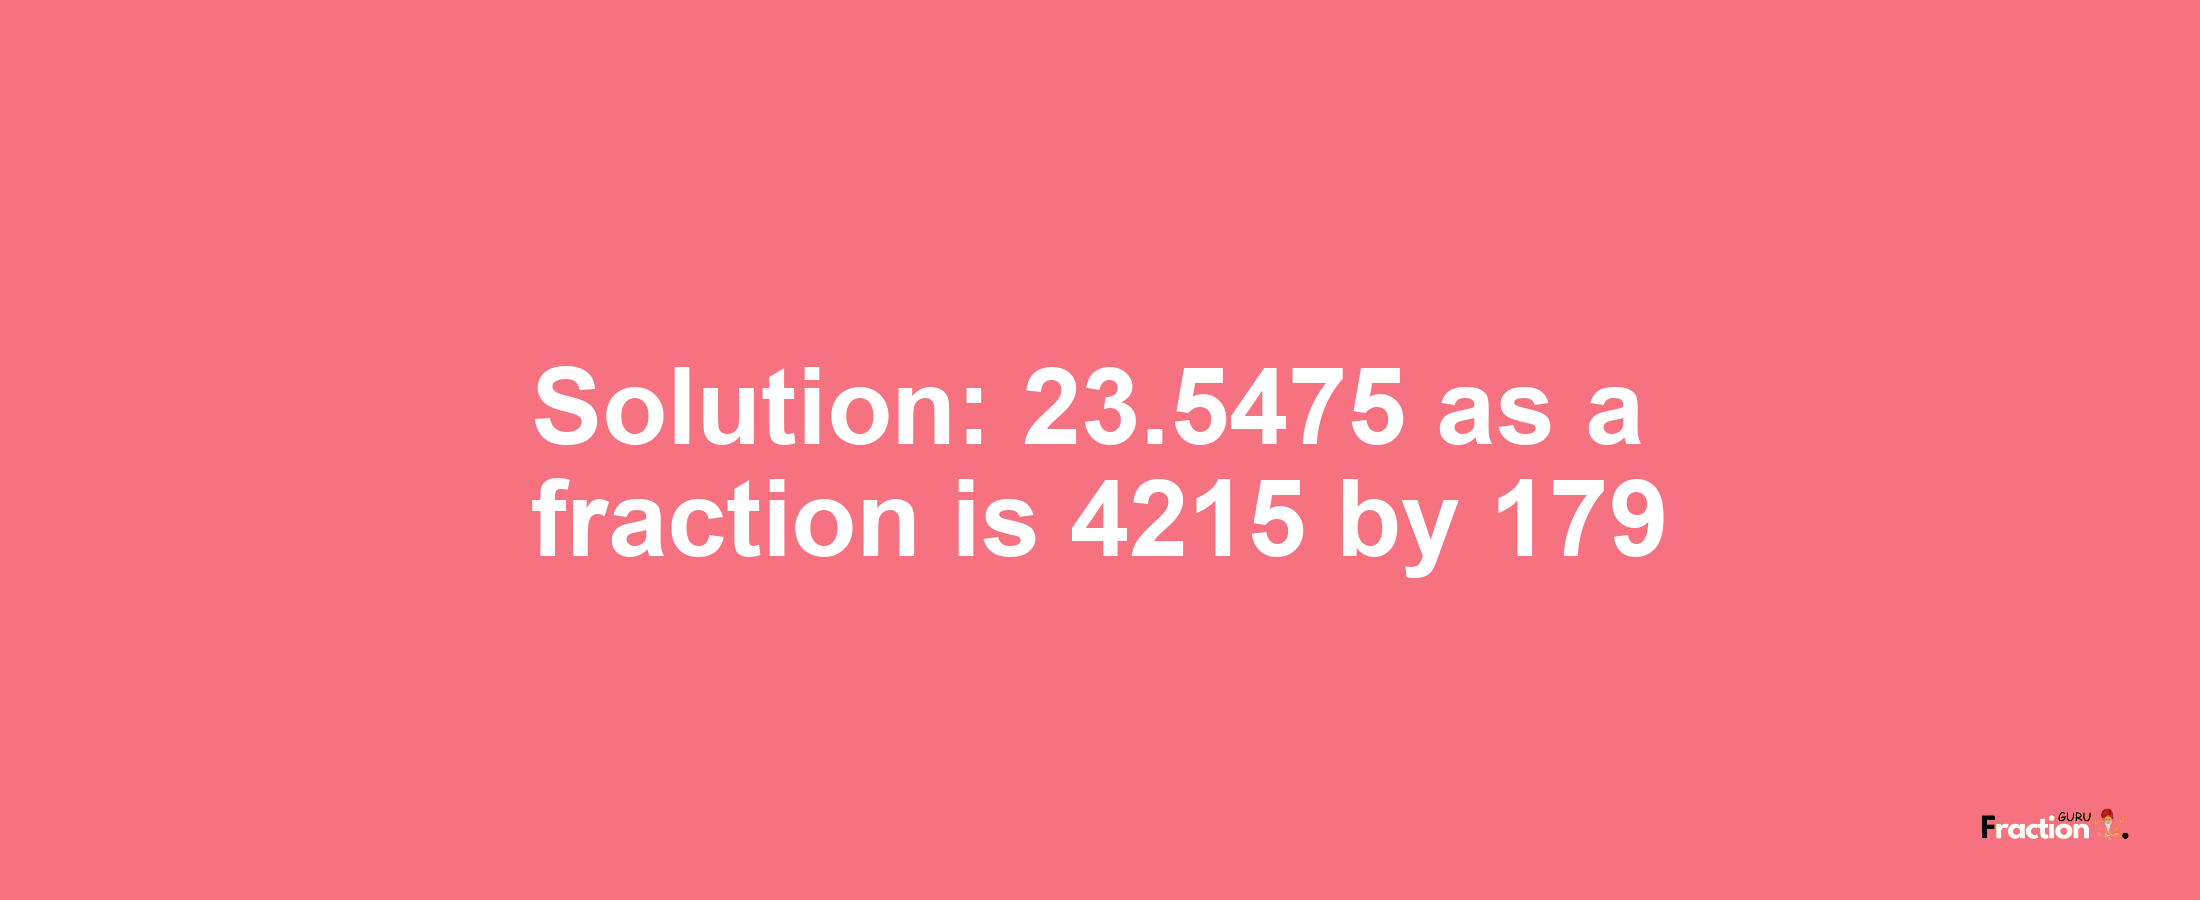 Solution:23.5475 as a fraction is 4215/179